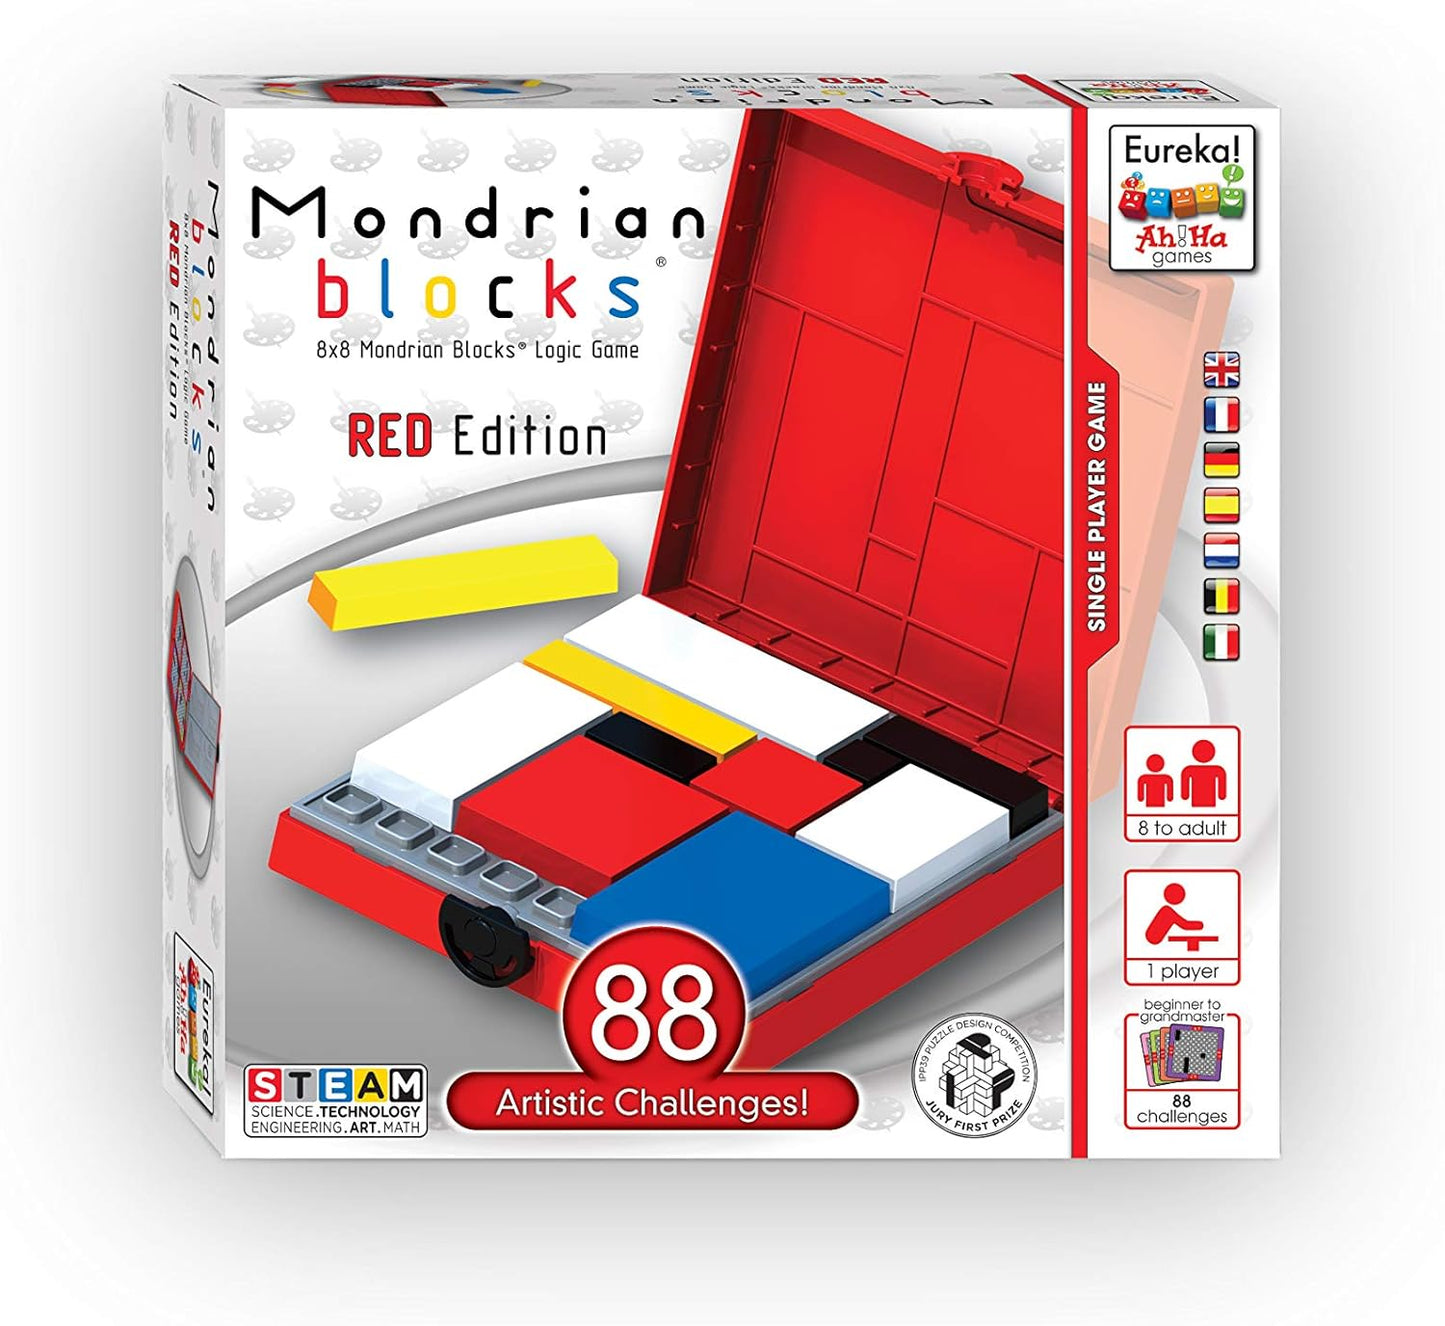 Mondrian Blocks Multi Award Winning Puzzle Game, Brain Teaser, Compact Travel Game on Board, Four Colour  Editions